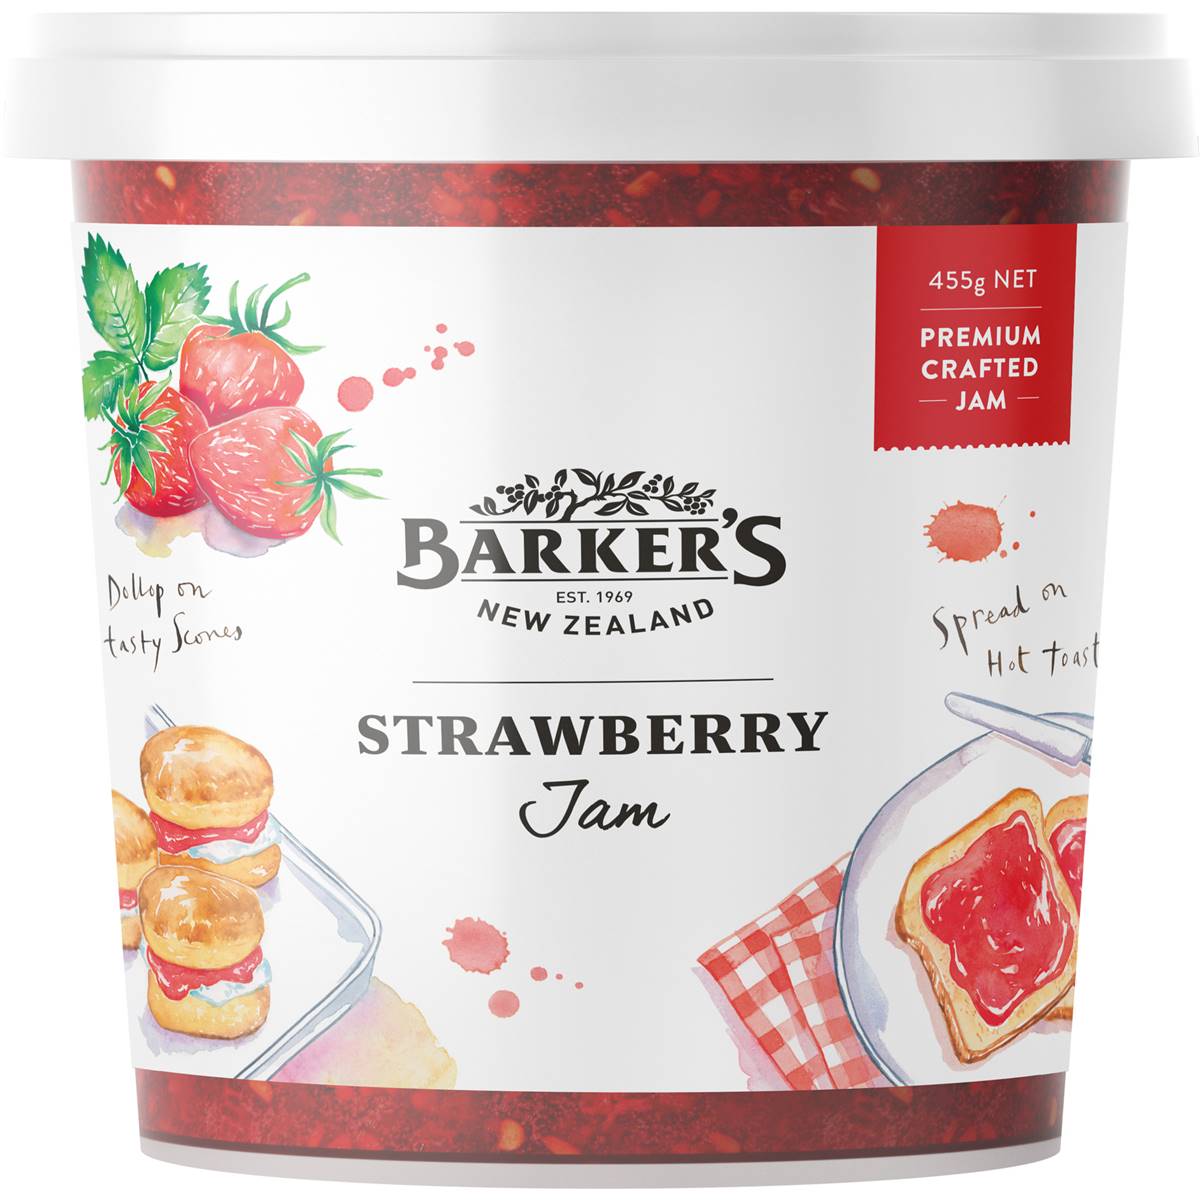 Calories in Barkers Anathoth Farm Strawberry Jam